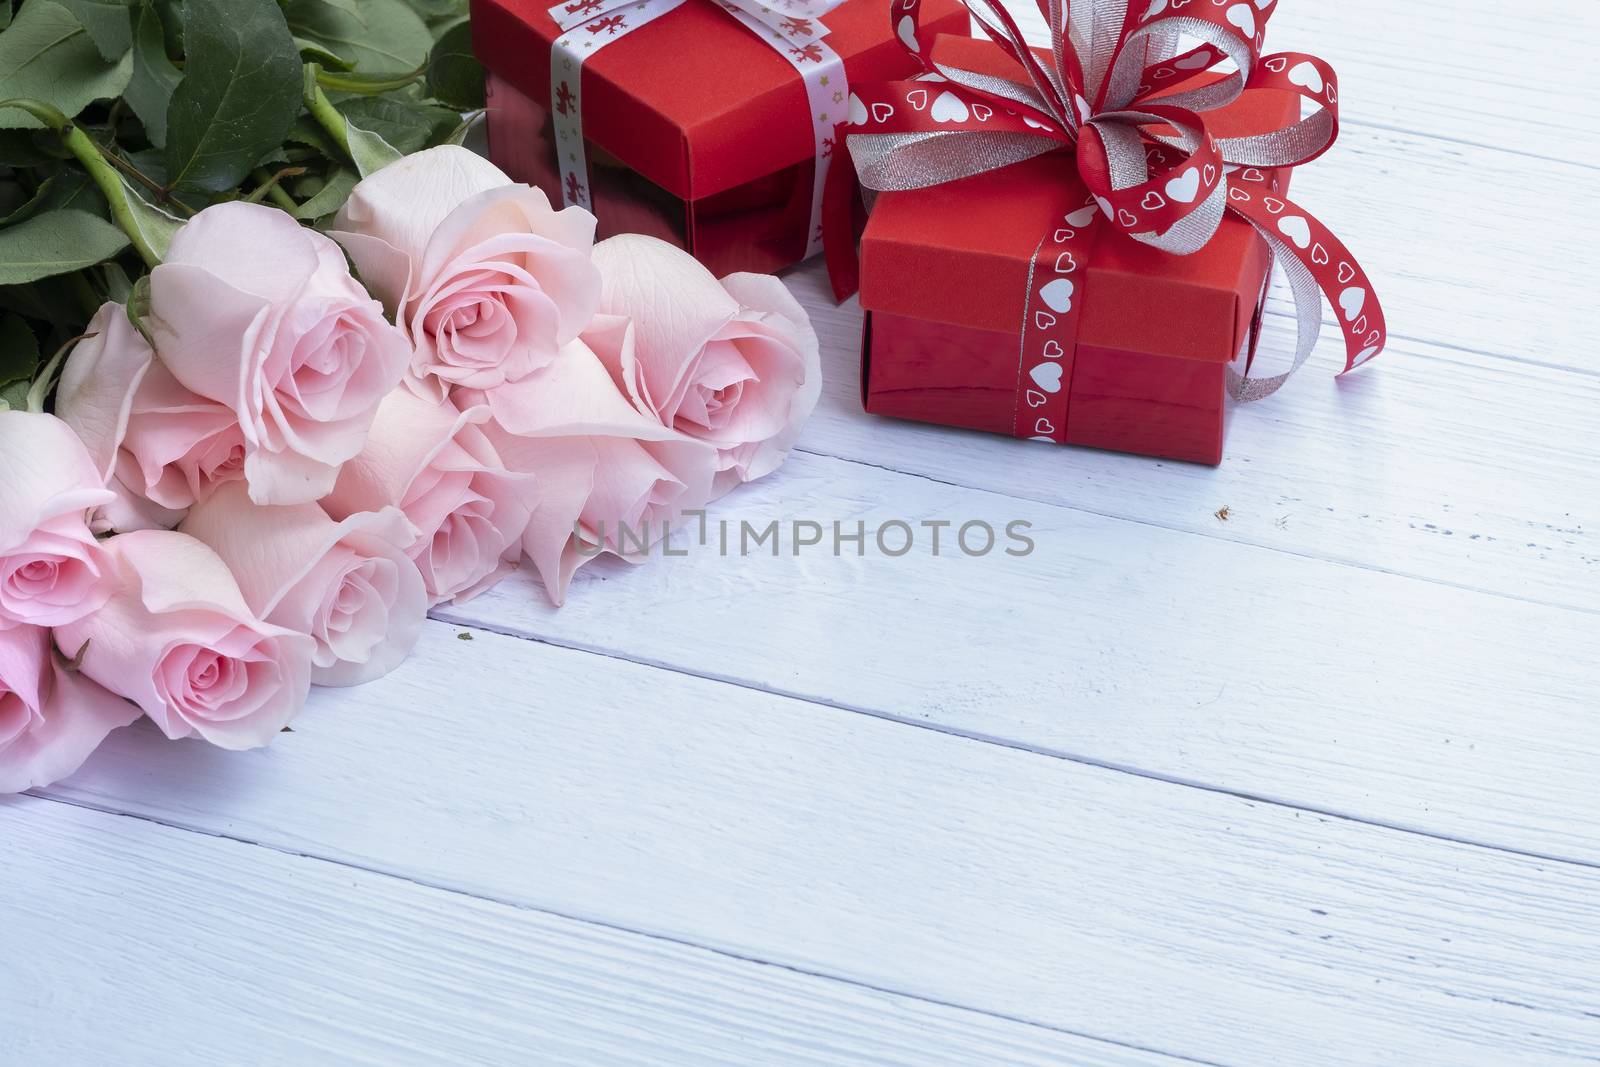 Beautiful bouquet of pink roses and red present boxes on pale blue-colored wood background. Selective focusing. Love, Romance, Valentine's Day, Anniversary.